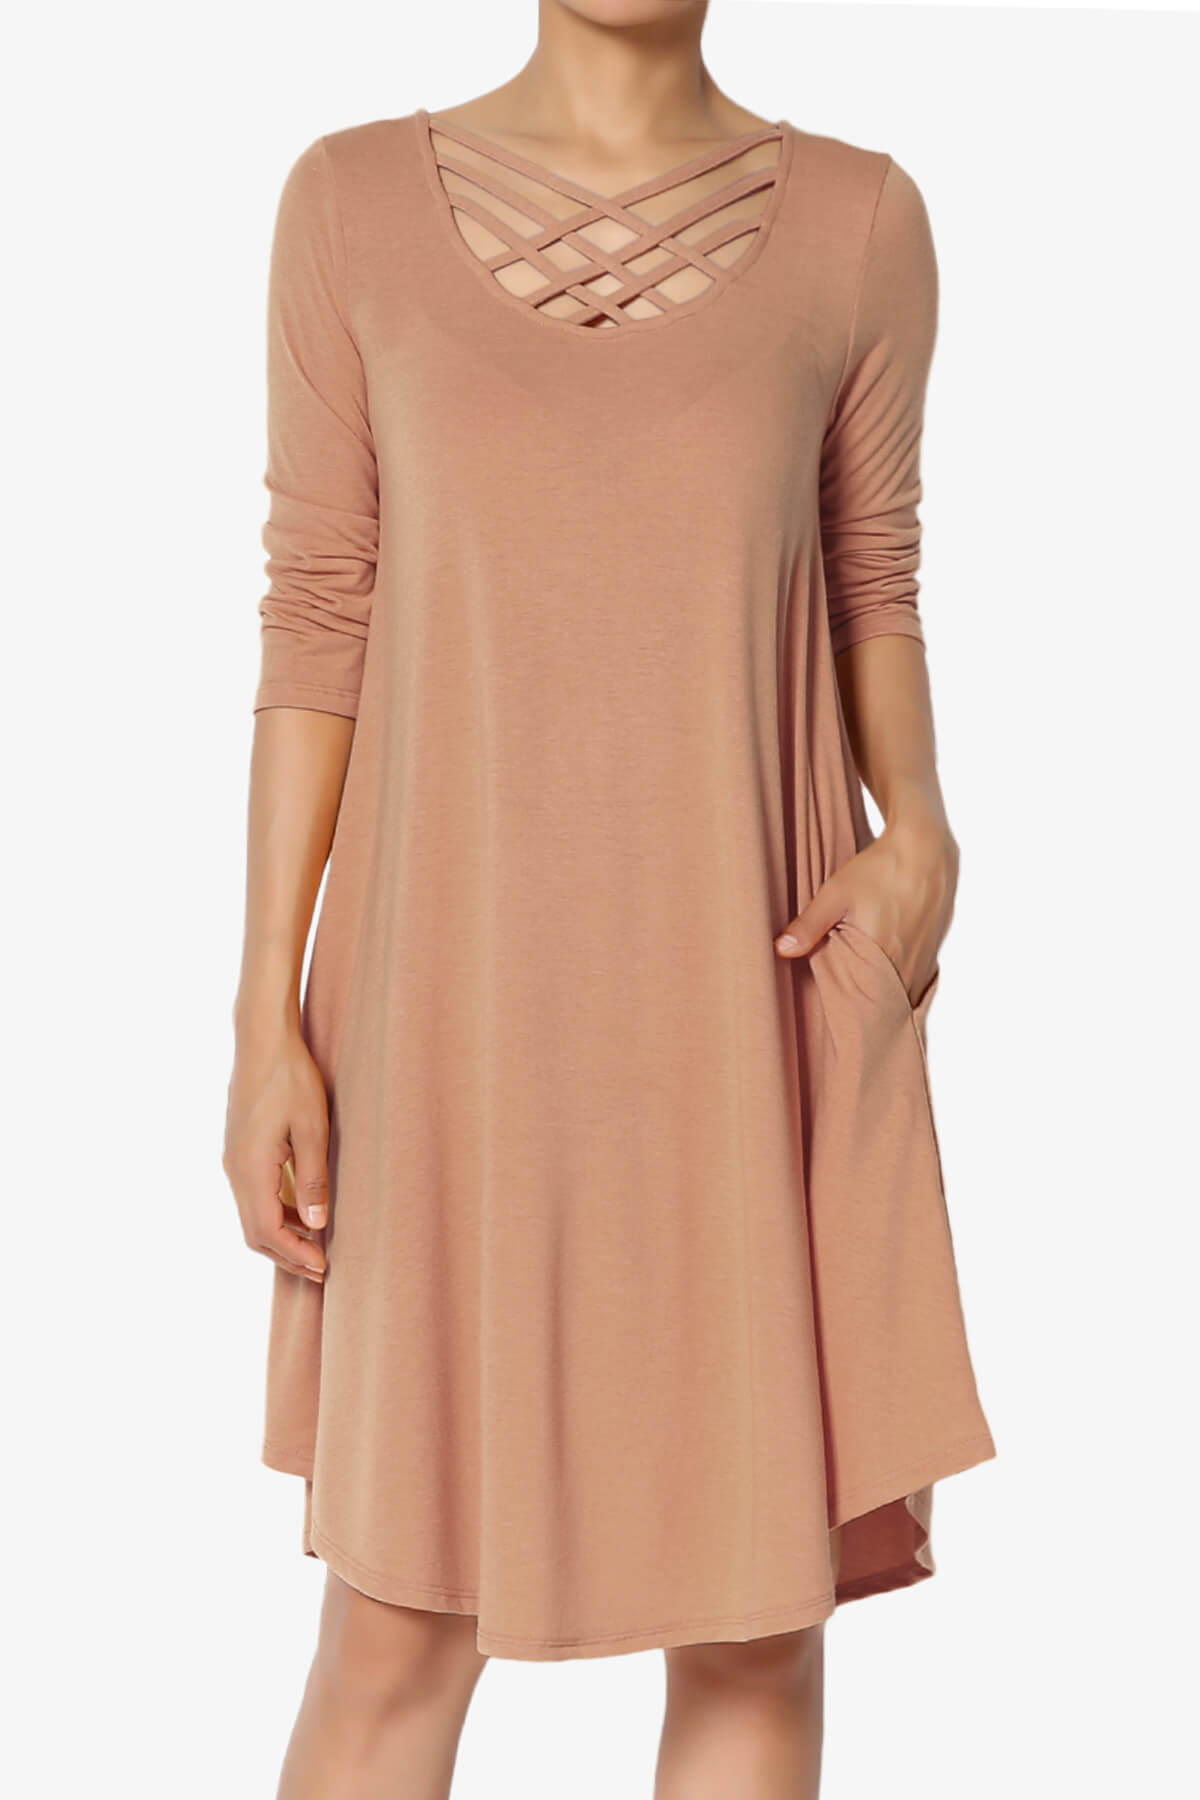 Ariella 3/4 Sleeve Strappy Scoop Neck Dress EGG SHELL_1